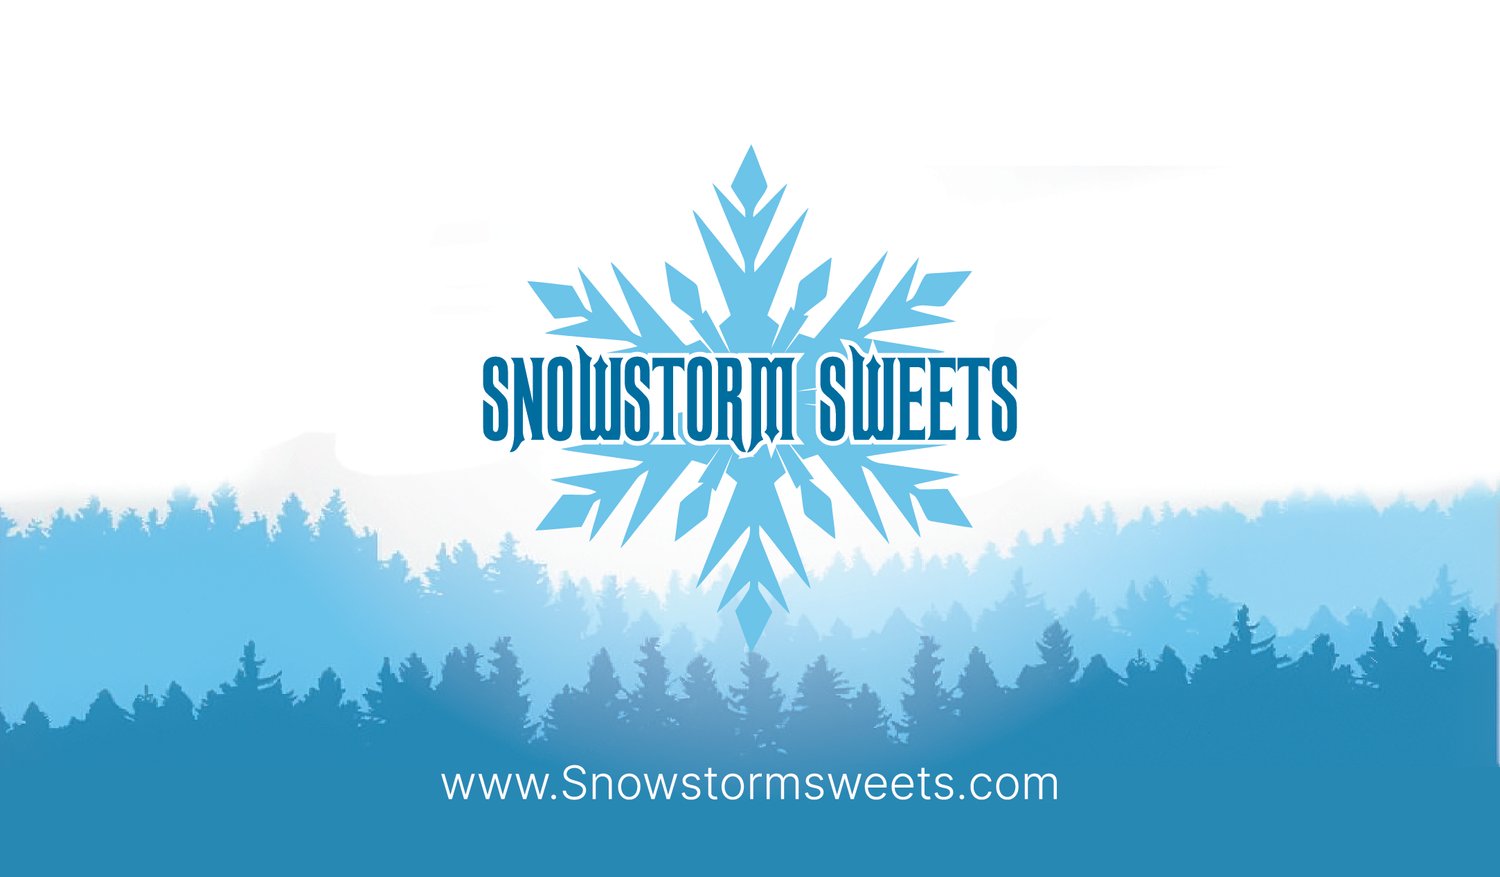 Snowstorm Sweets